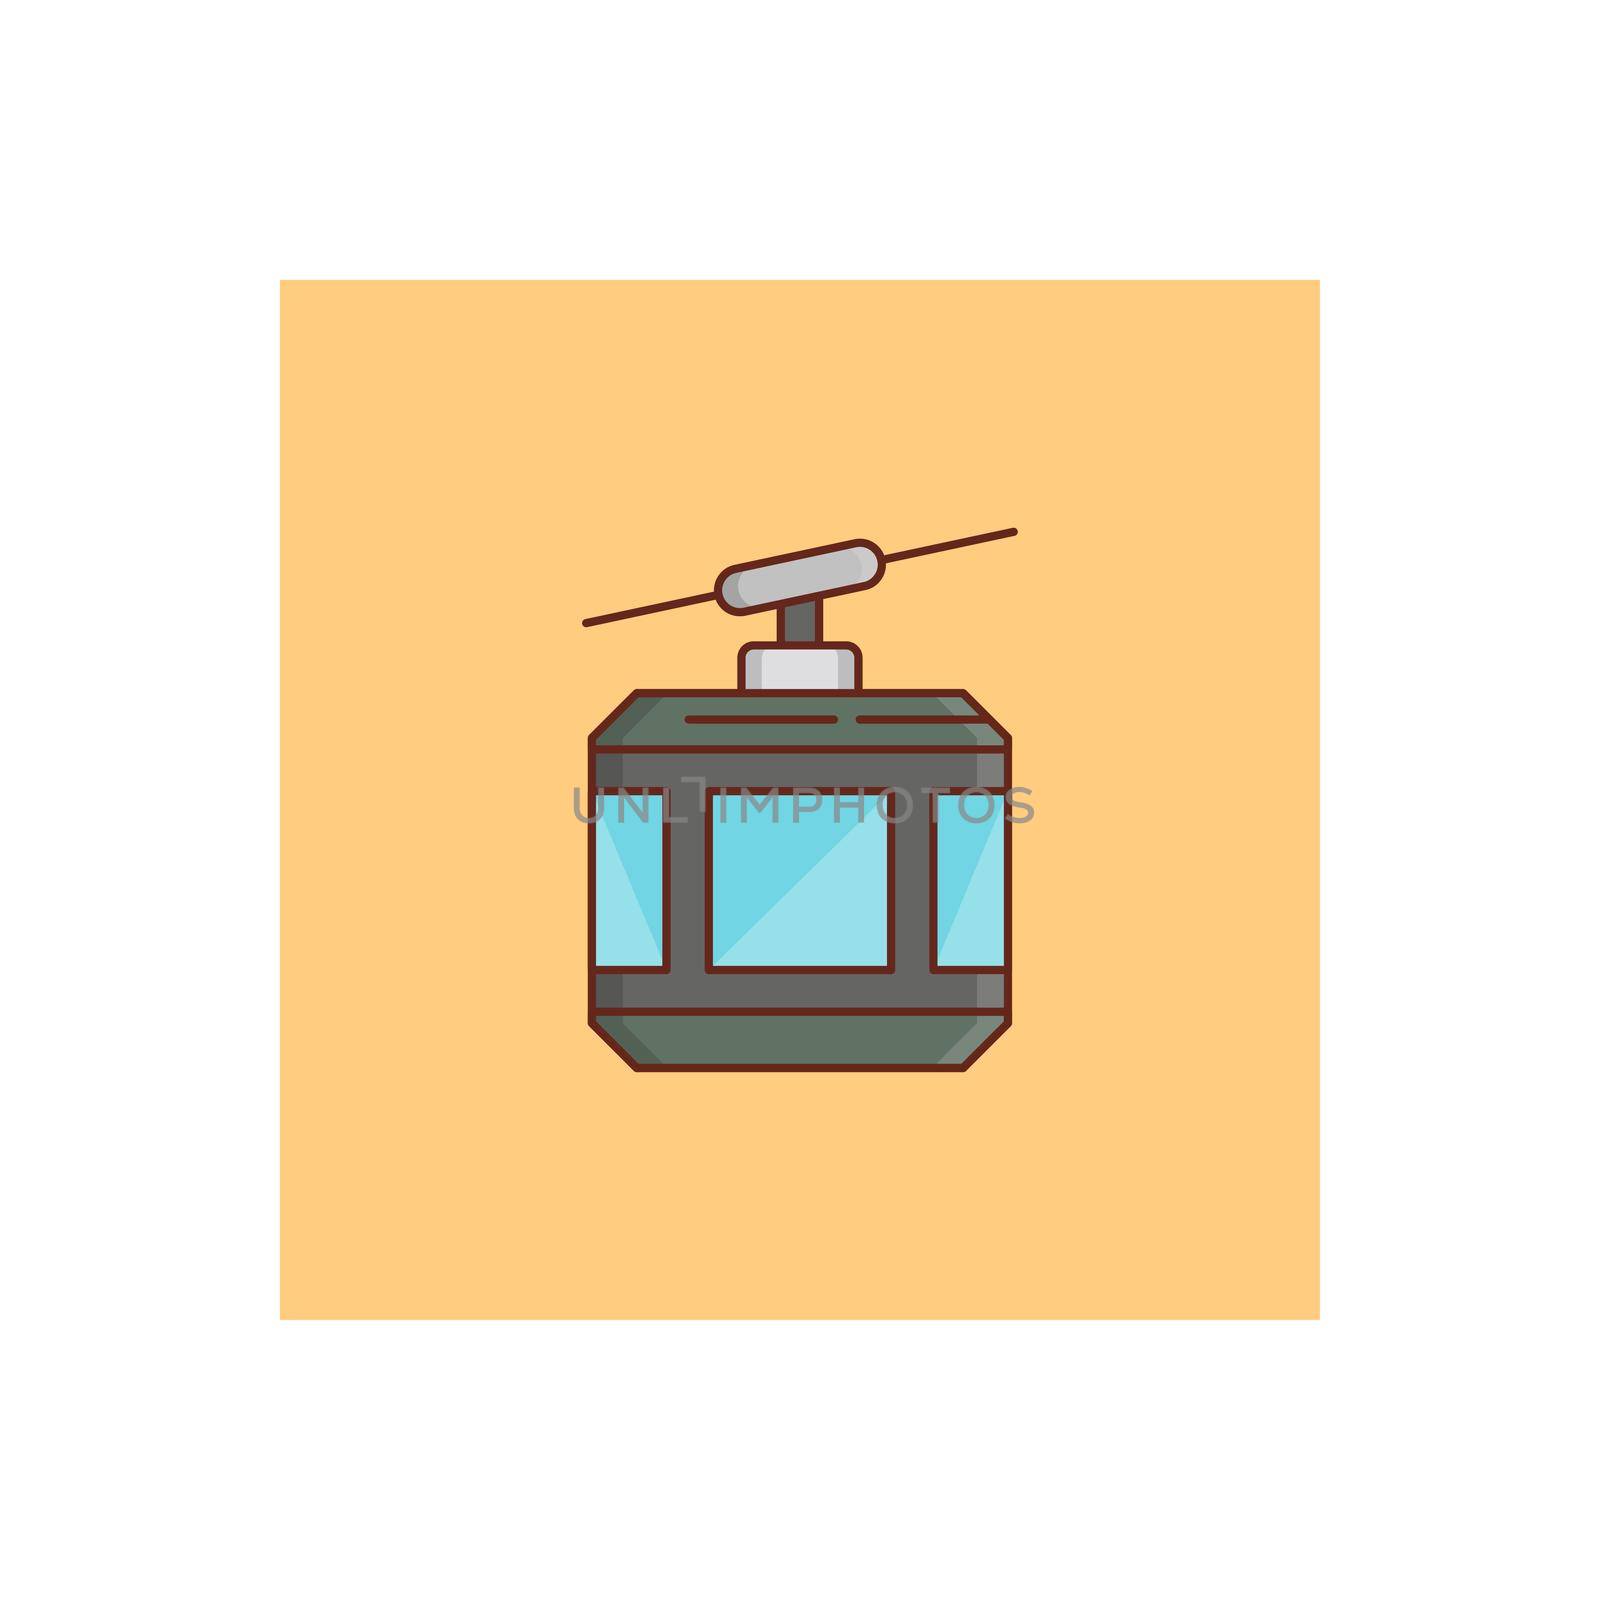 chairlift by FlaticonsDesign